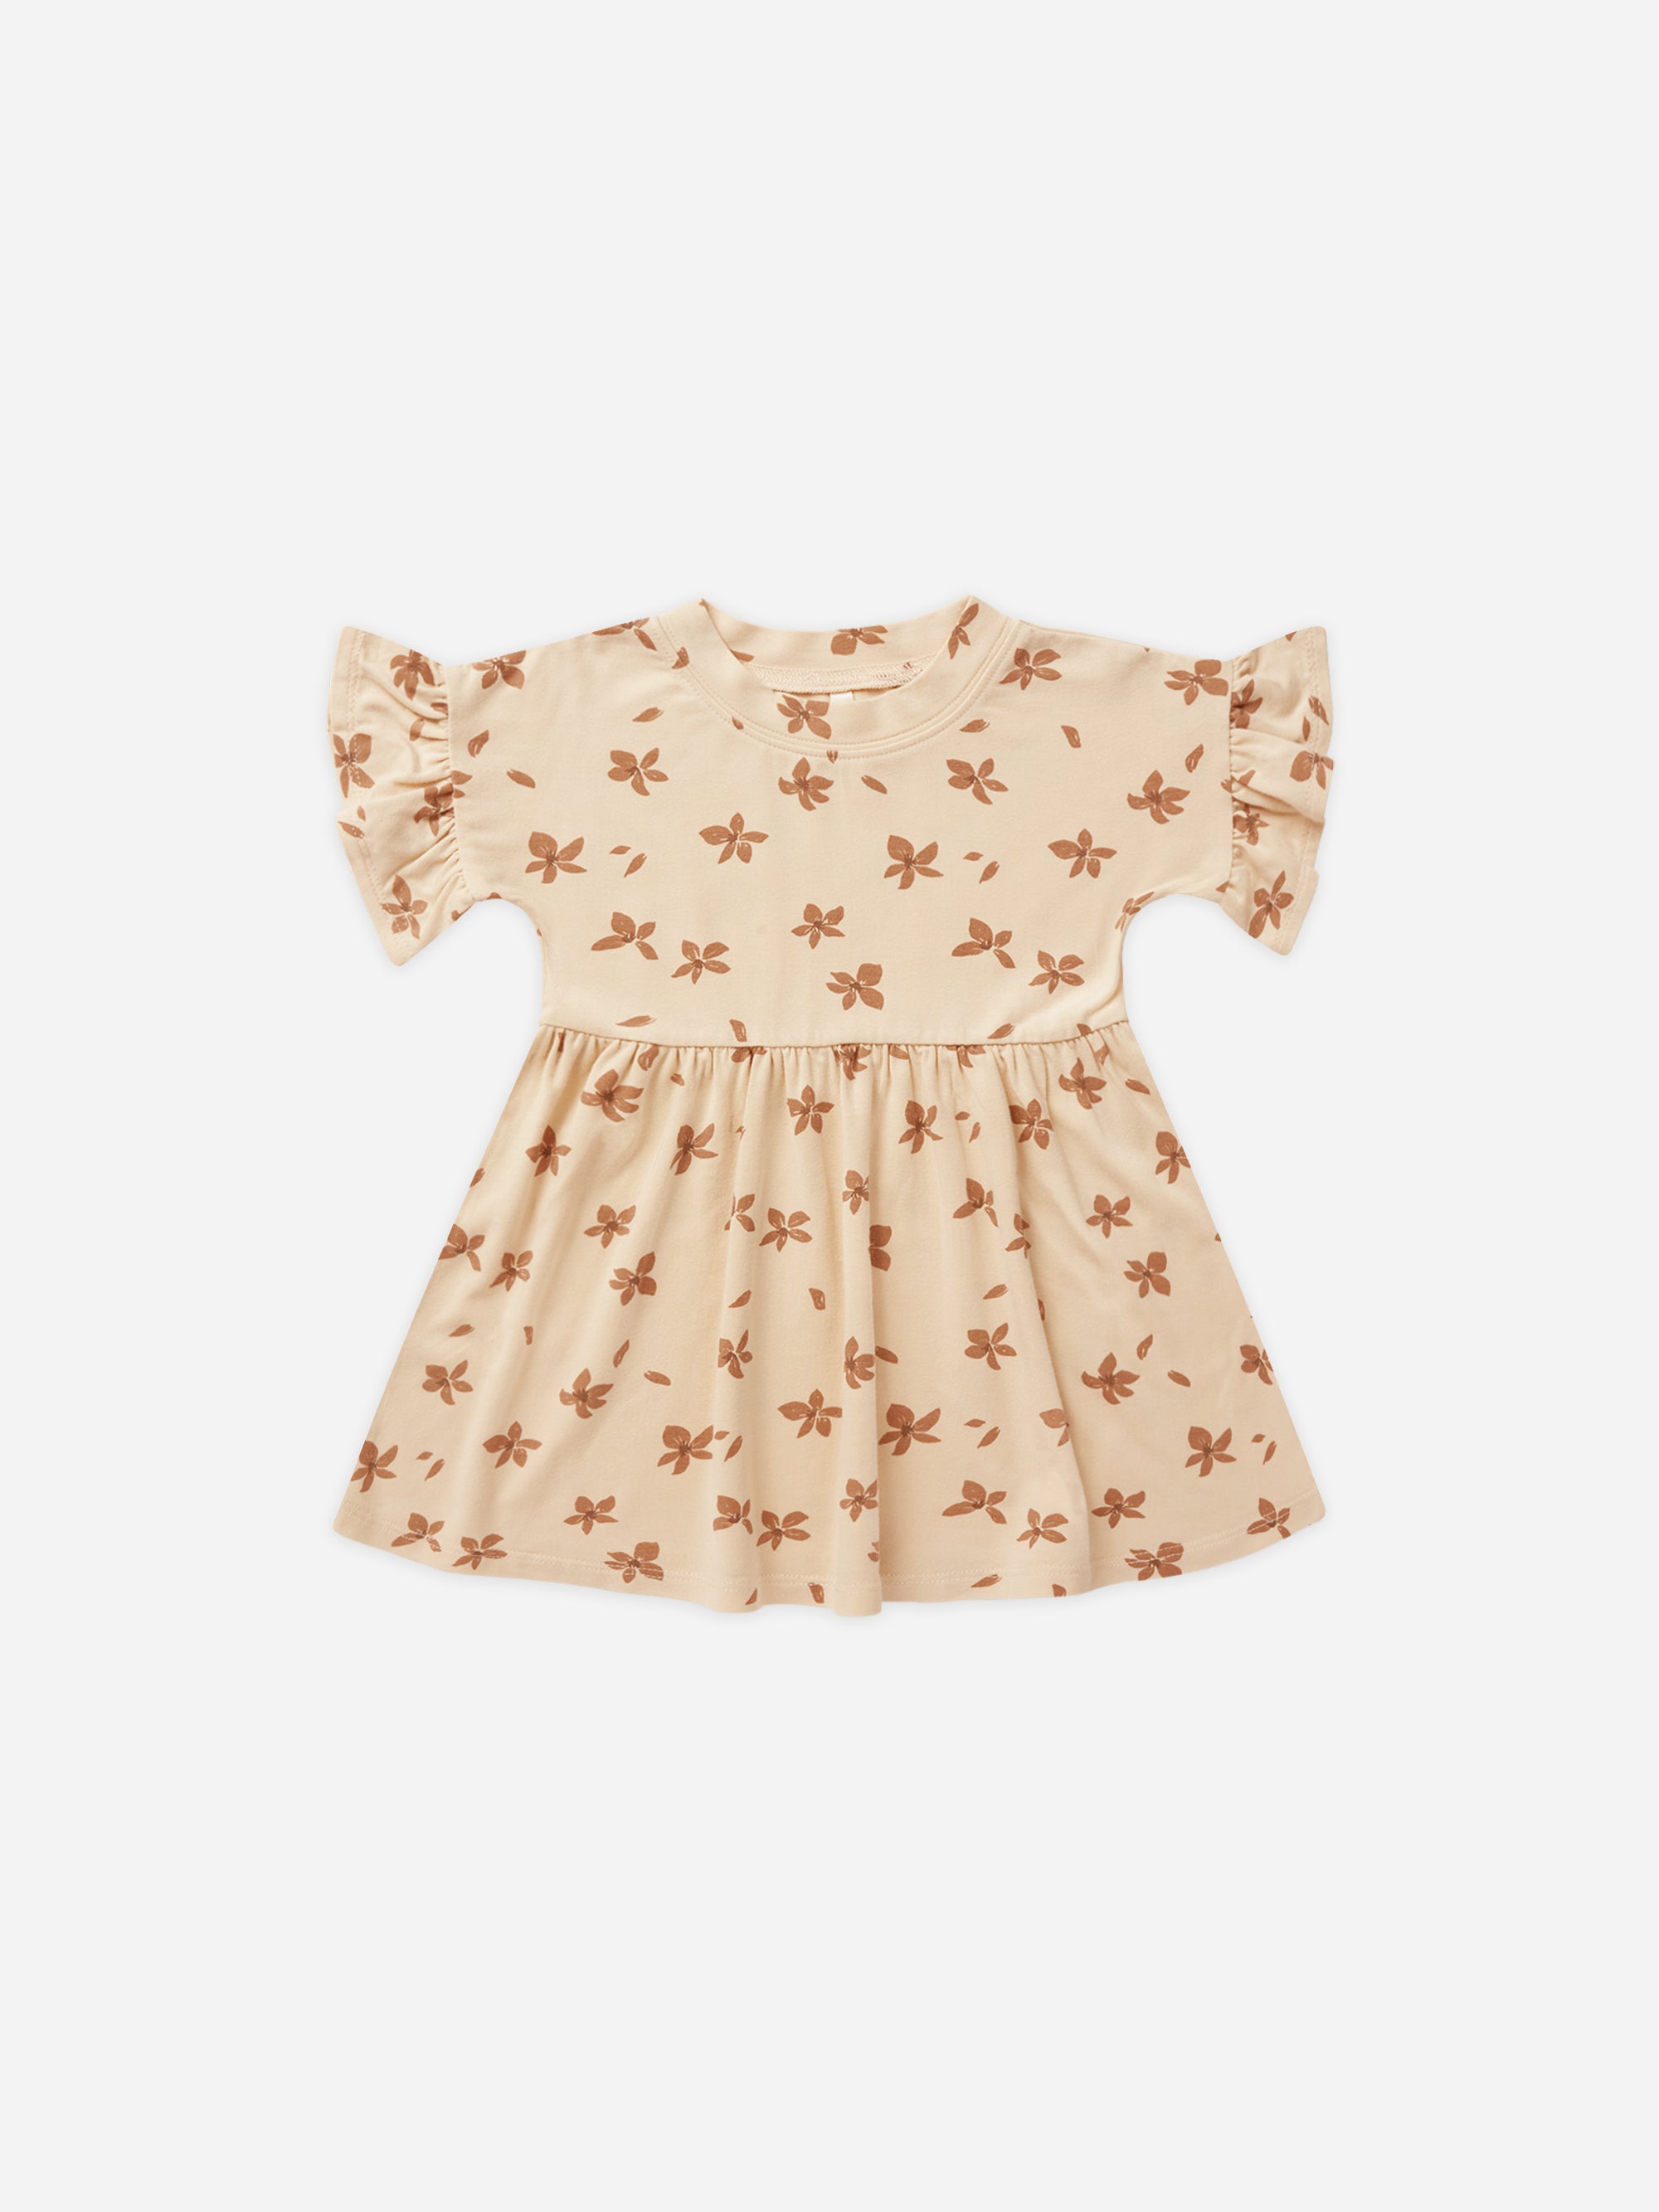 Babydoll Dress || Scatter - Rylee + Cru | Kids Clothes | Trendy Baby Clothes | Modern Infant Outfits |